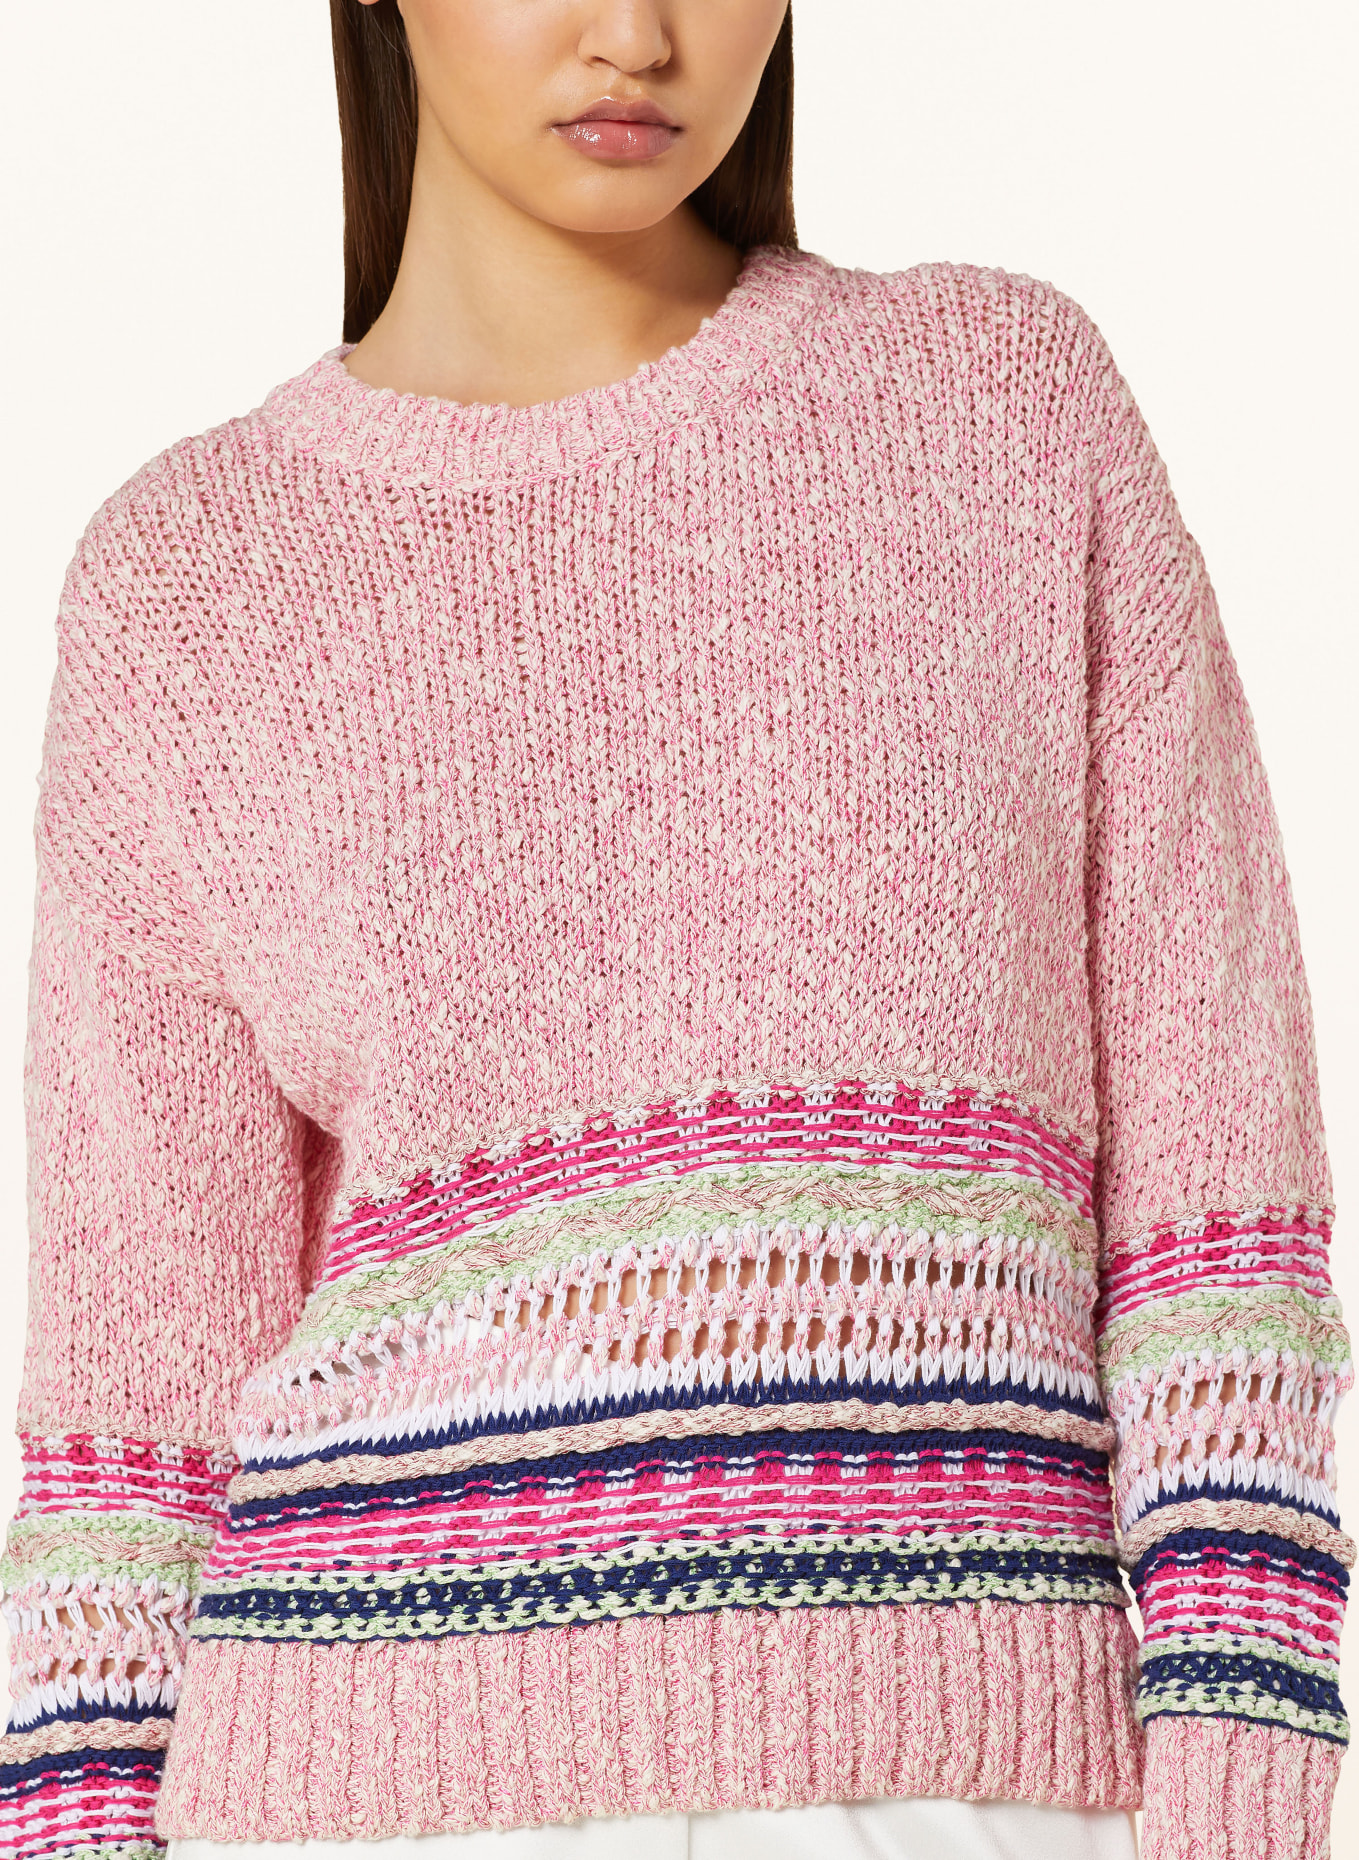 rich&royal Pullover, Farbe: CREME/ WEISS/ PINK (Bild 4)